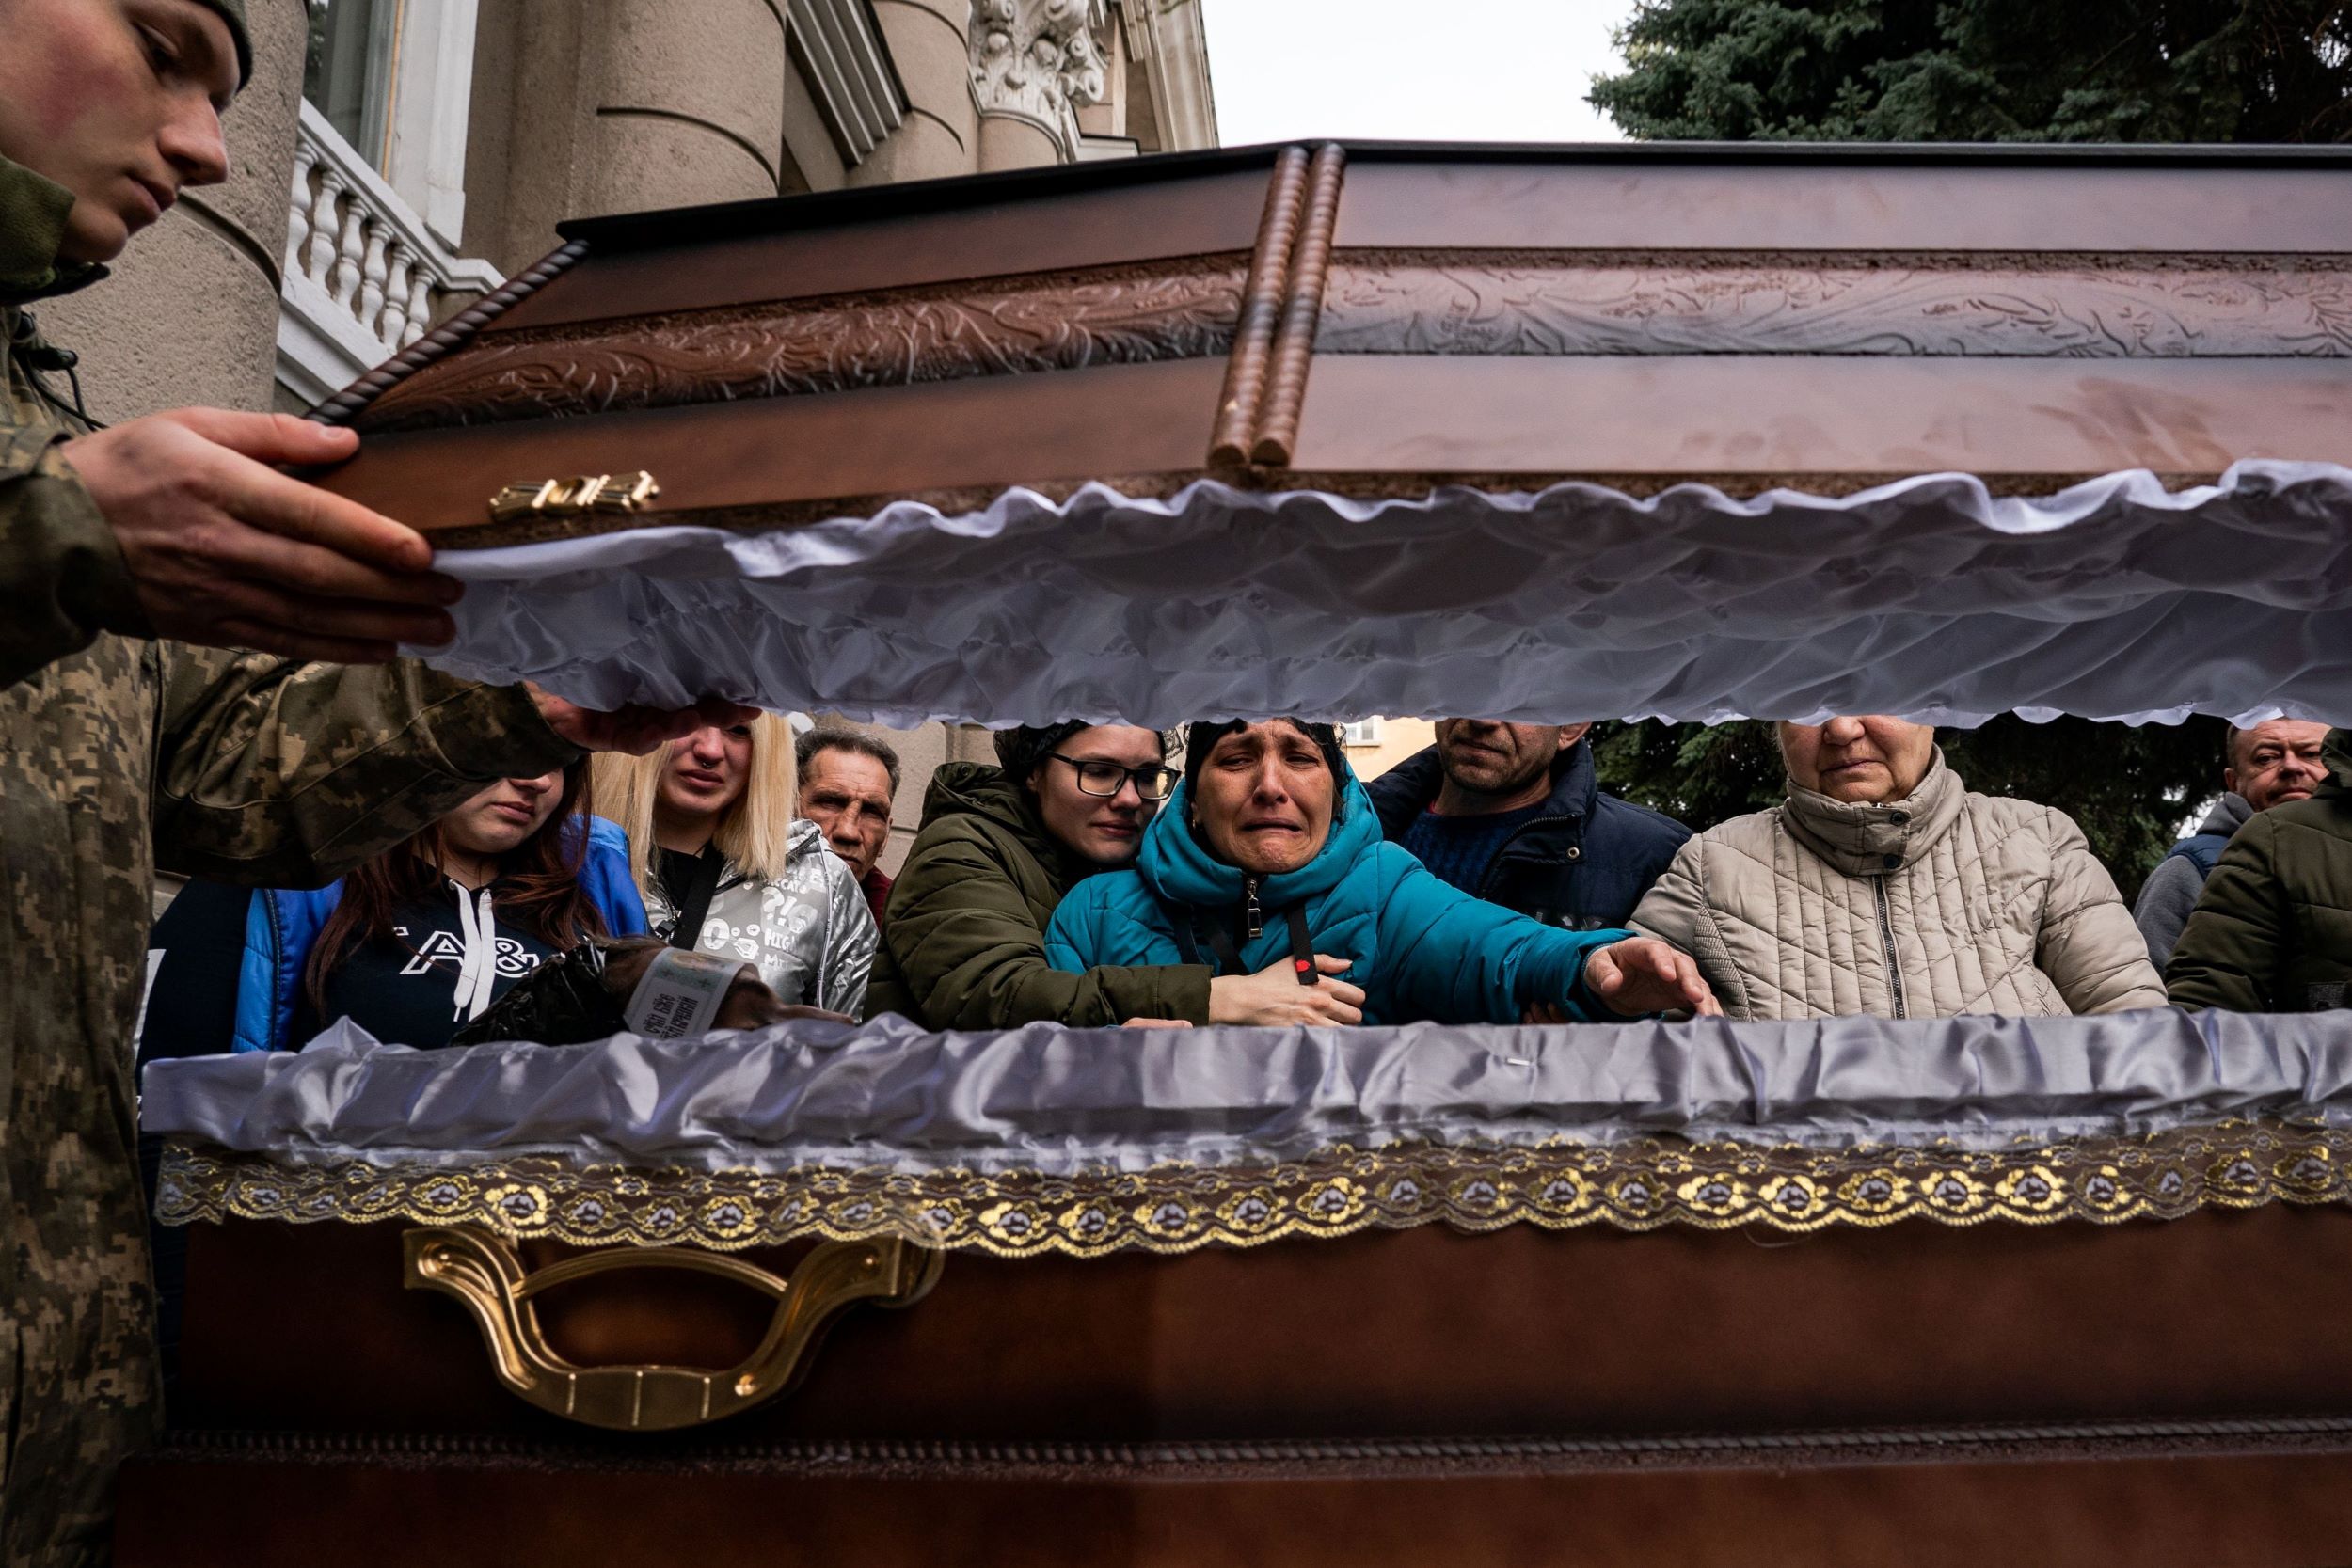 On dying & grief (Part 1) - Ukrainians grieving